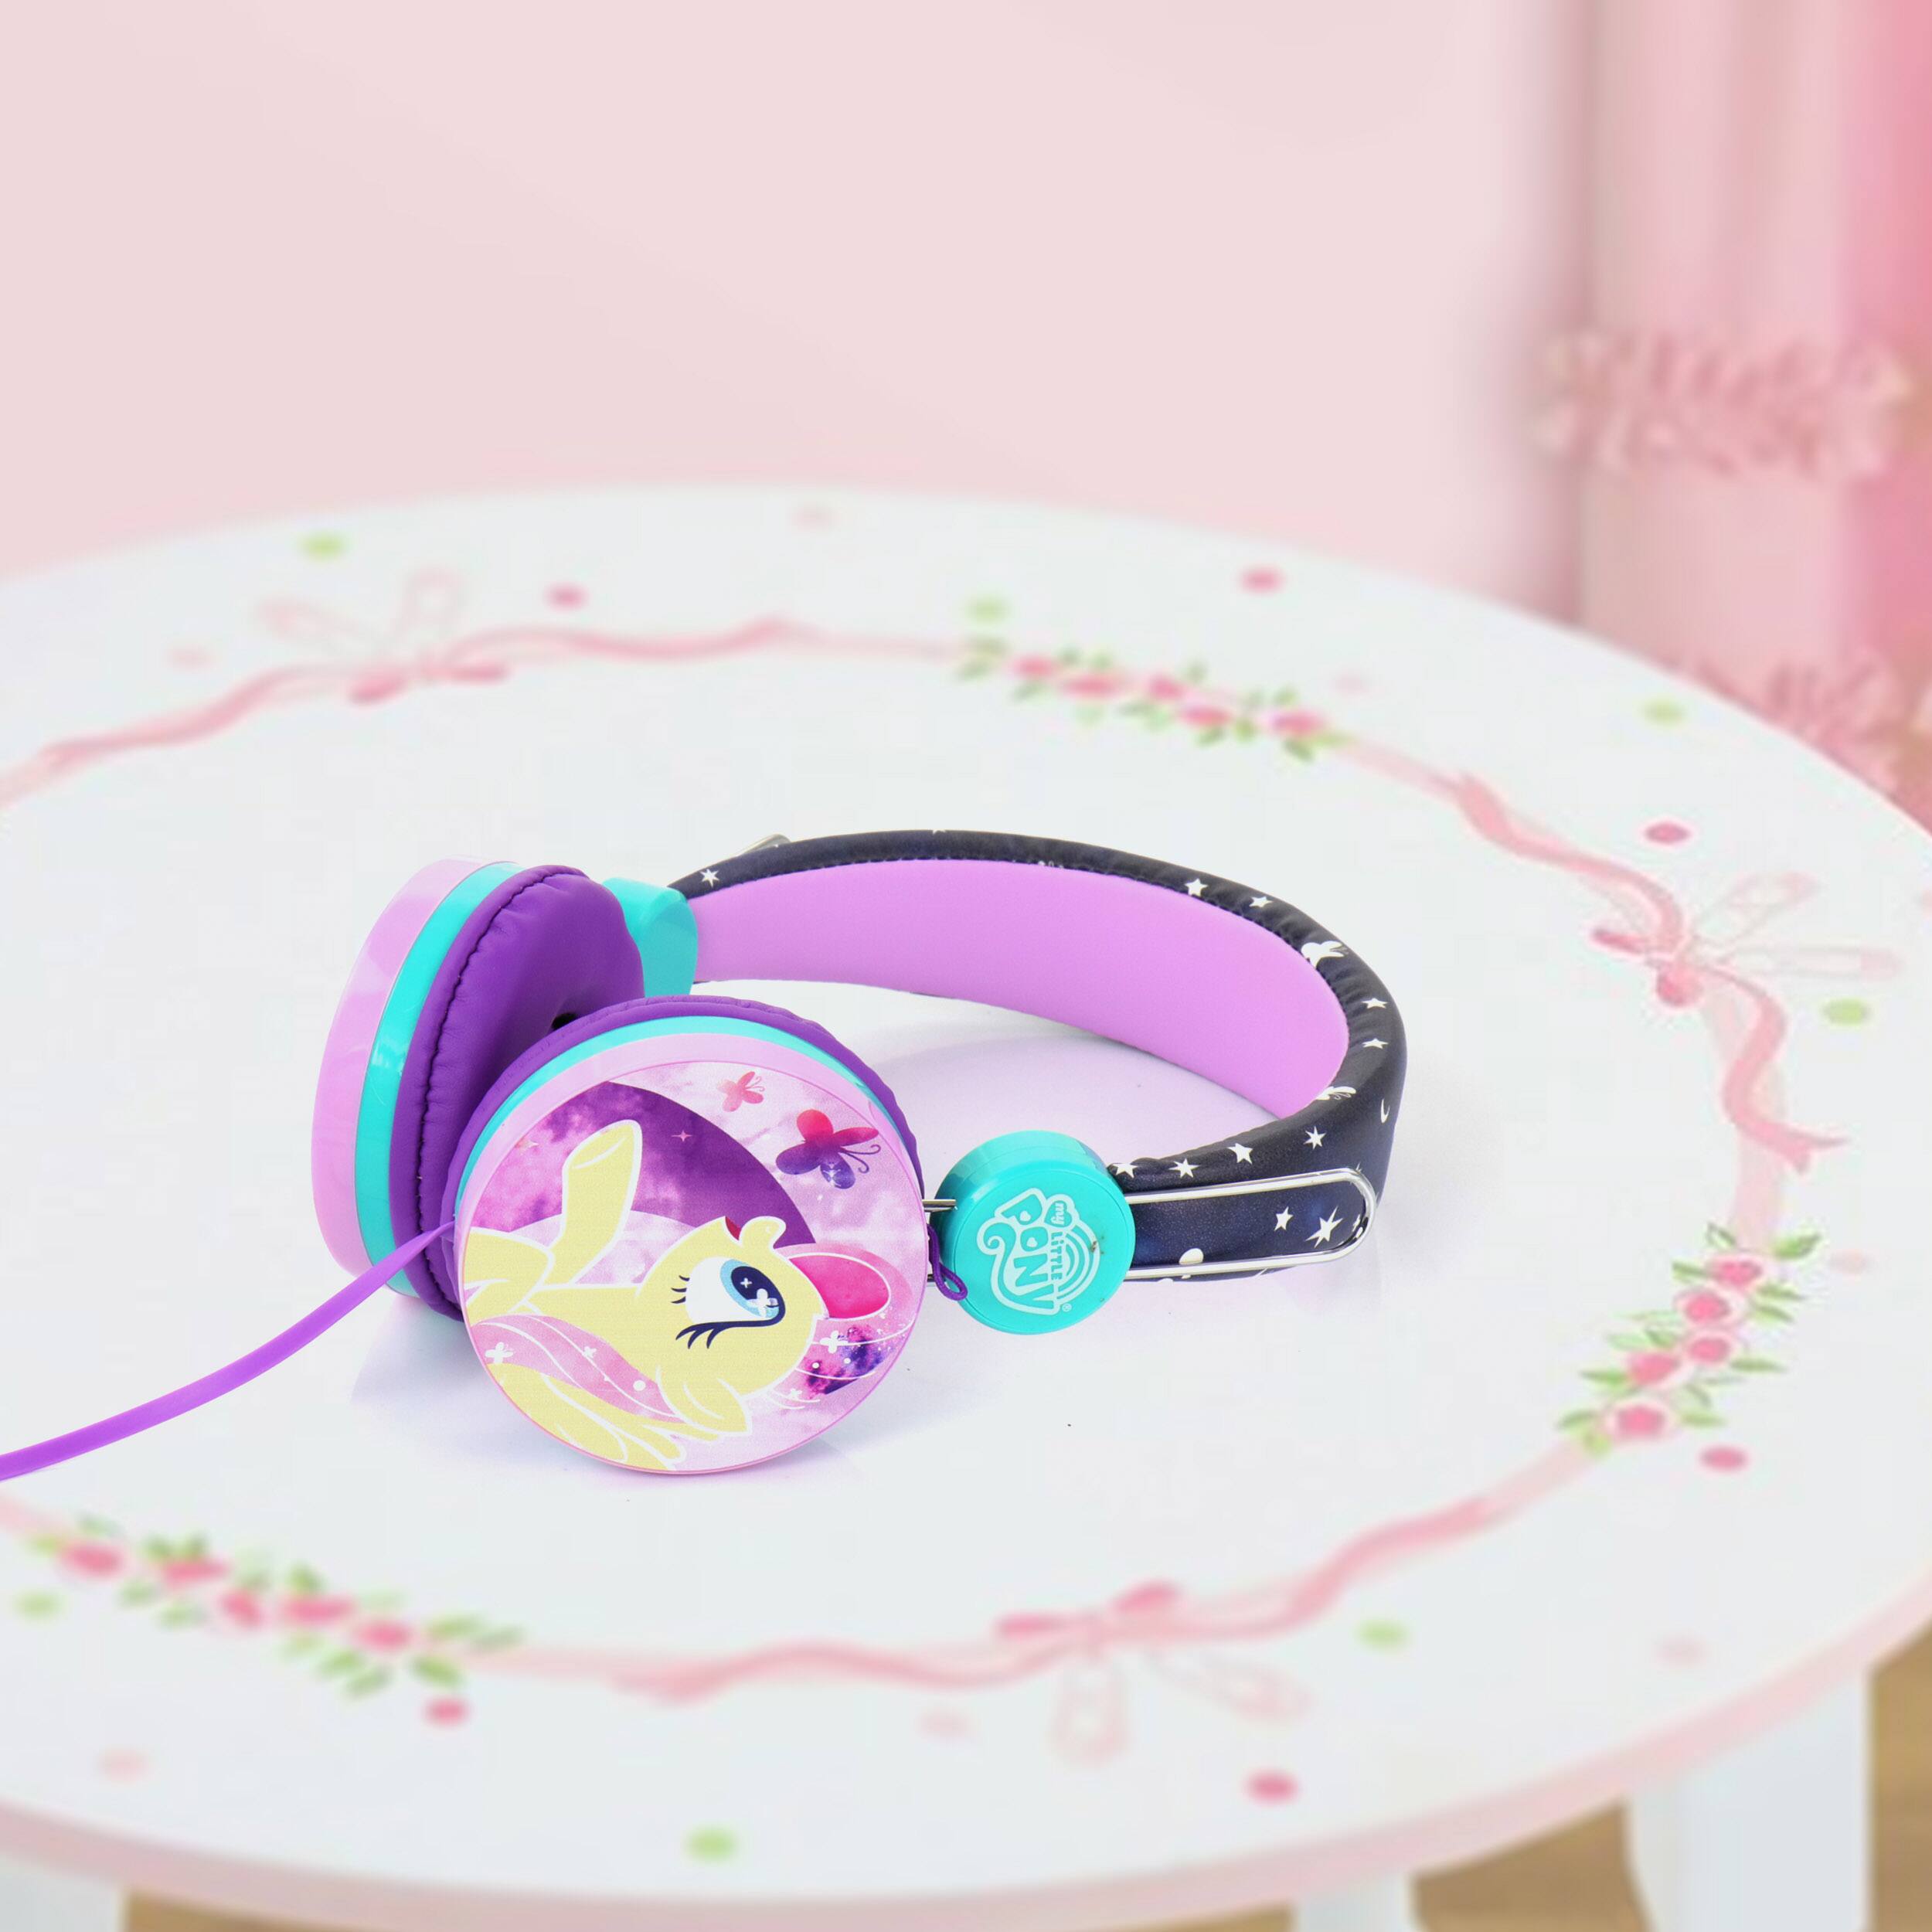 My Little Pony High Quality Wired Headphones with Glitter